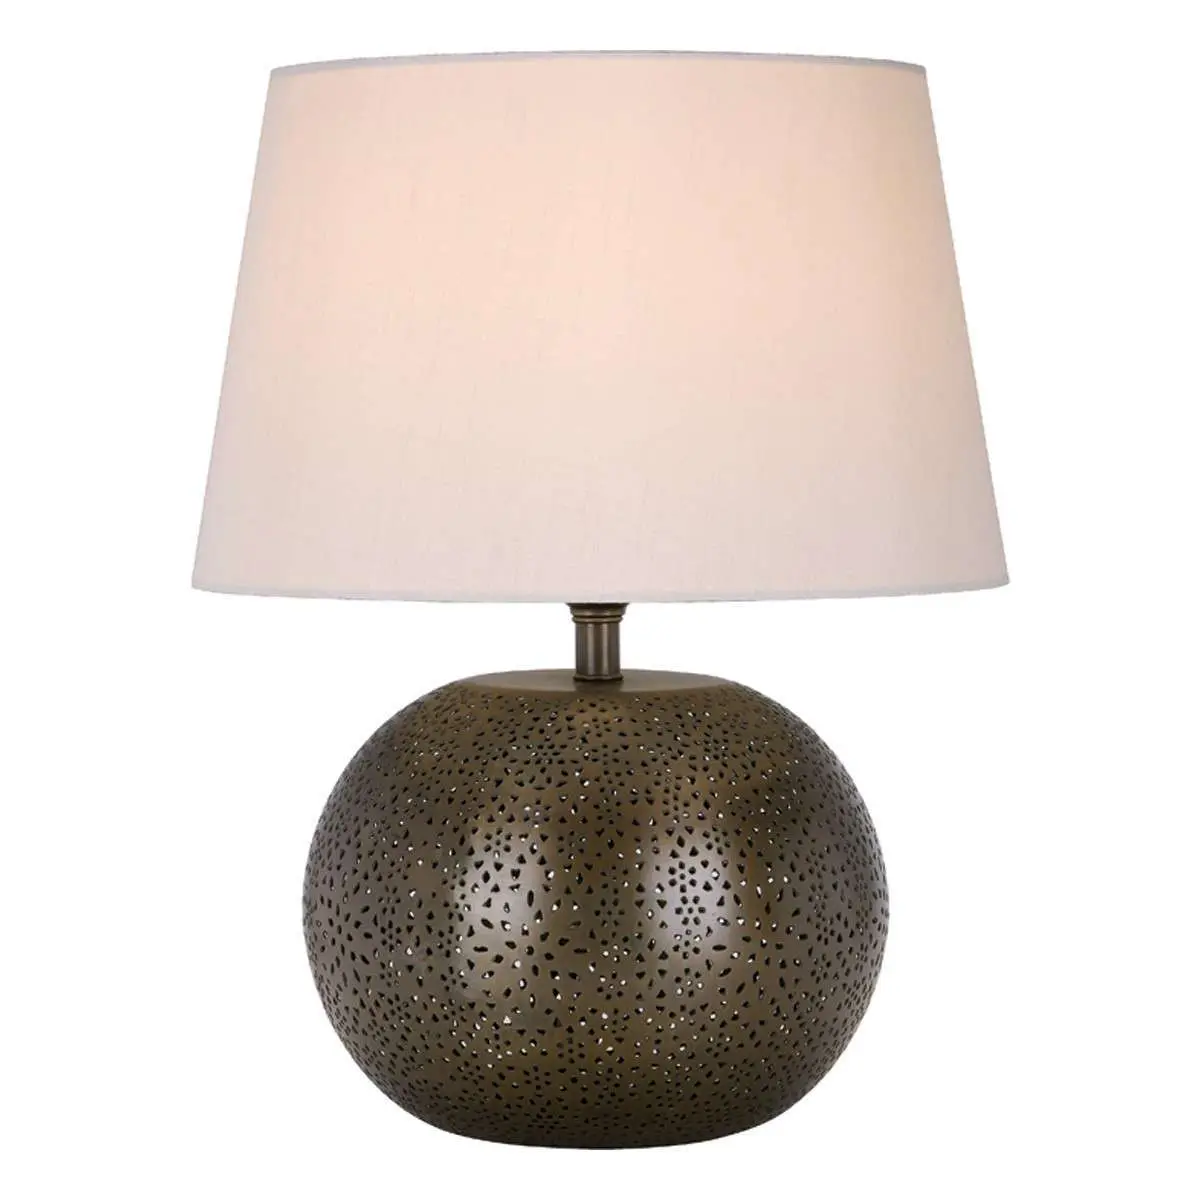 Bega Table Lamp Antique Brass Base Only